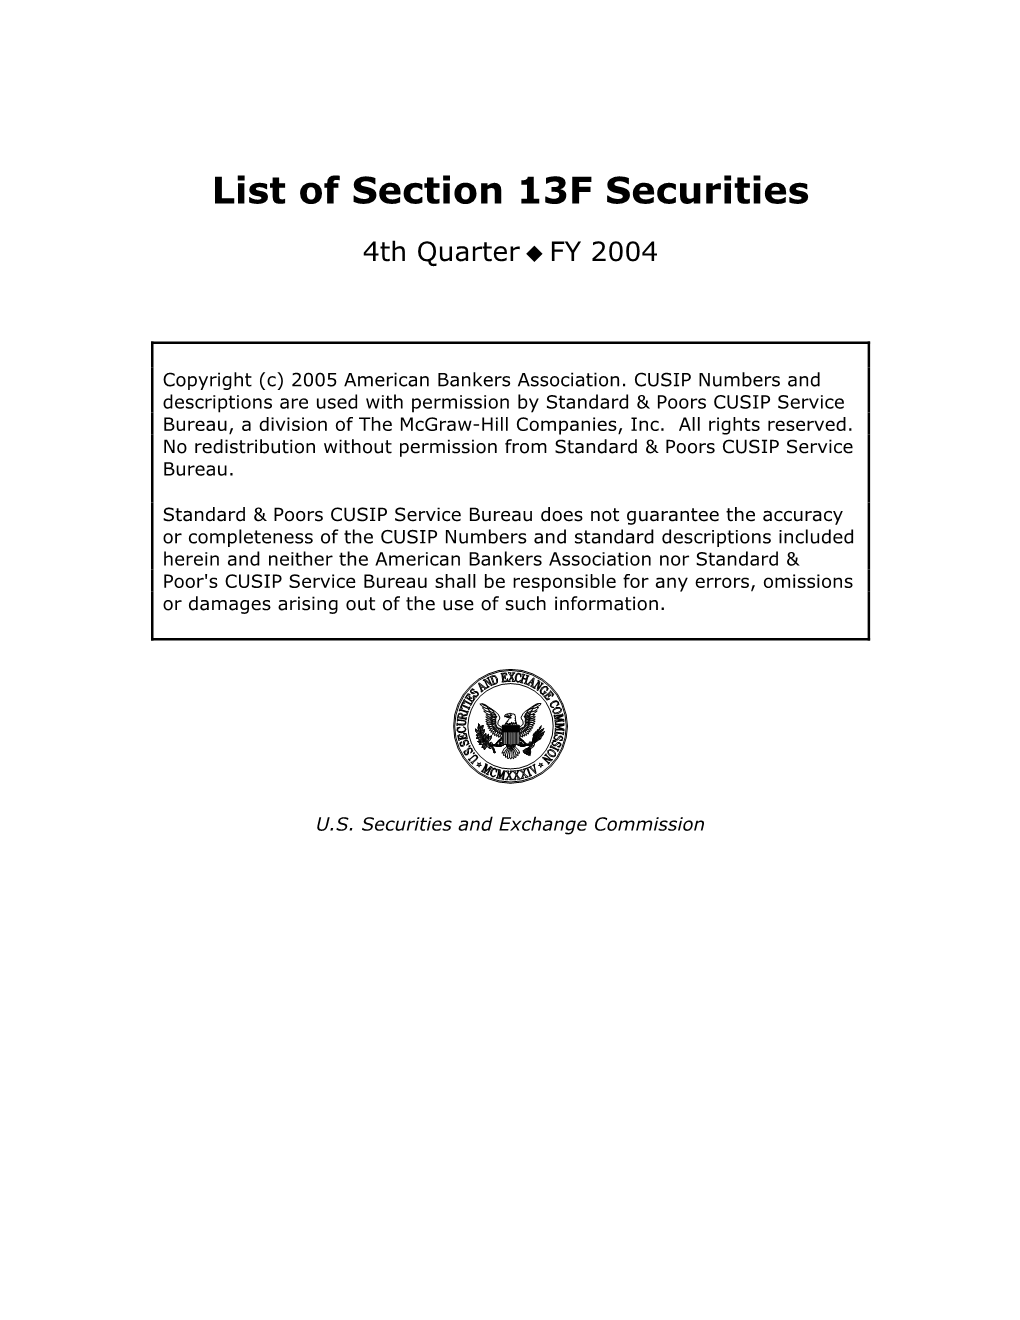 List of Section 13F Securities, Fourth Quarter, 2004